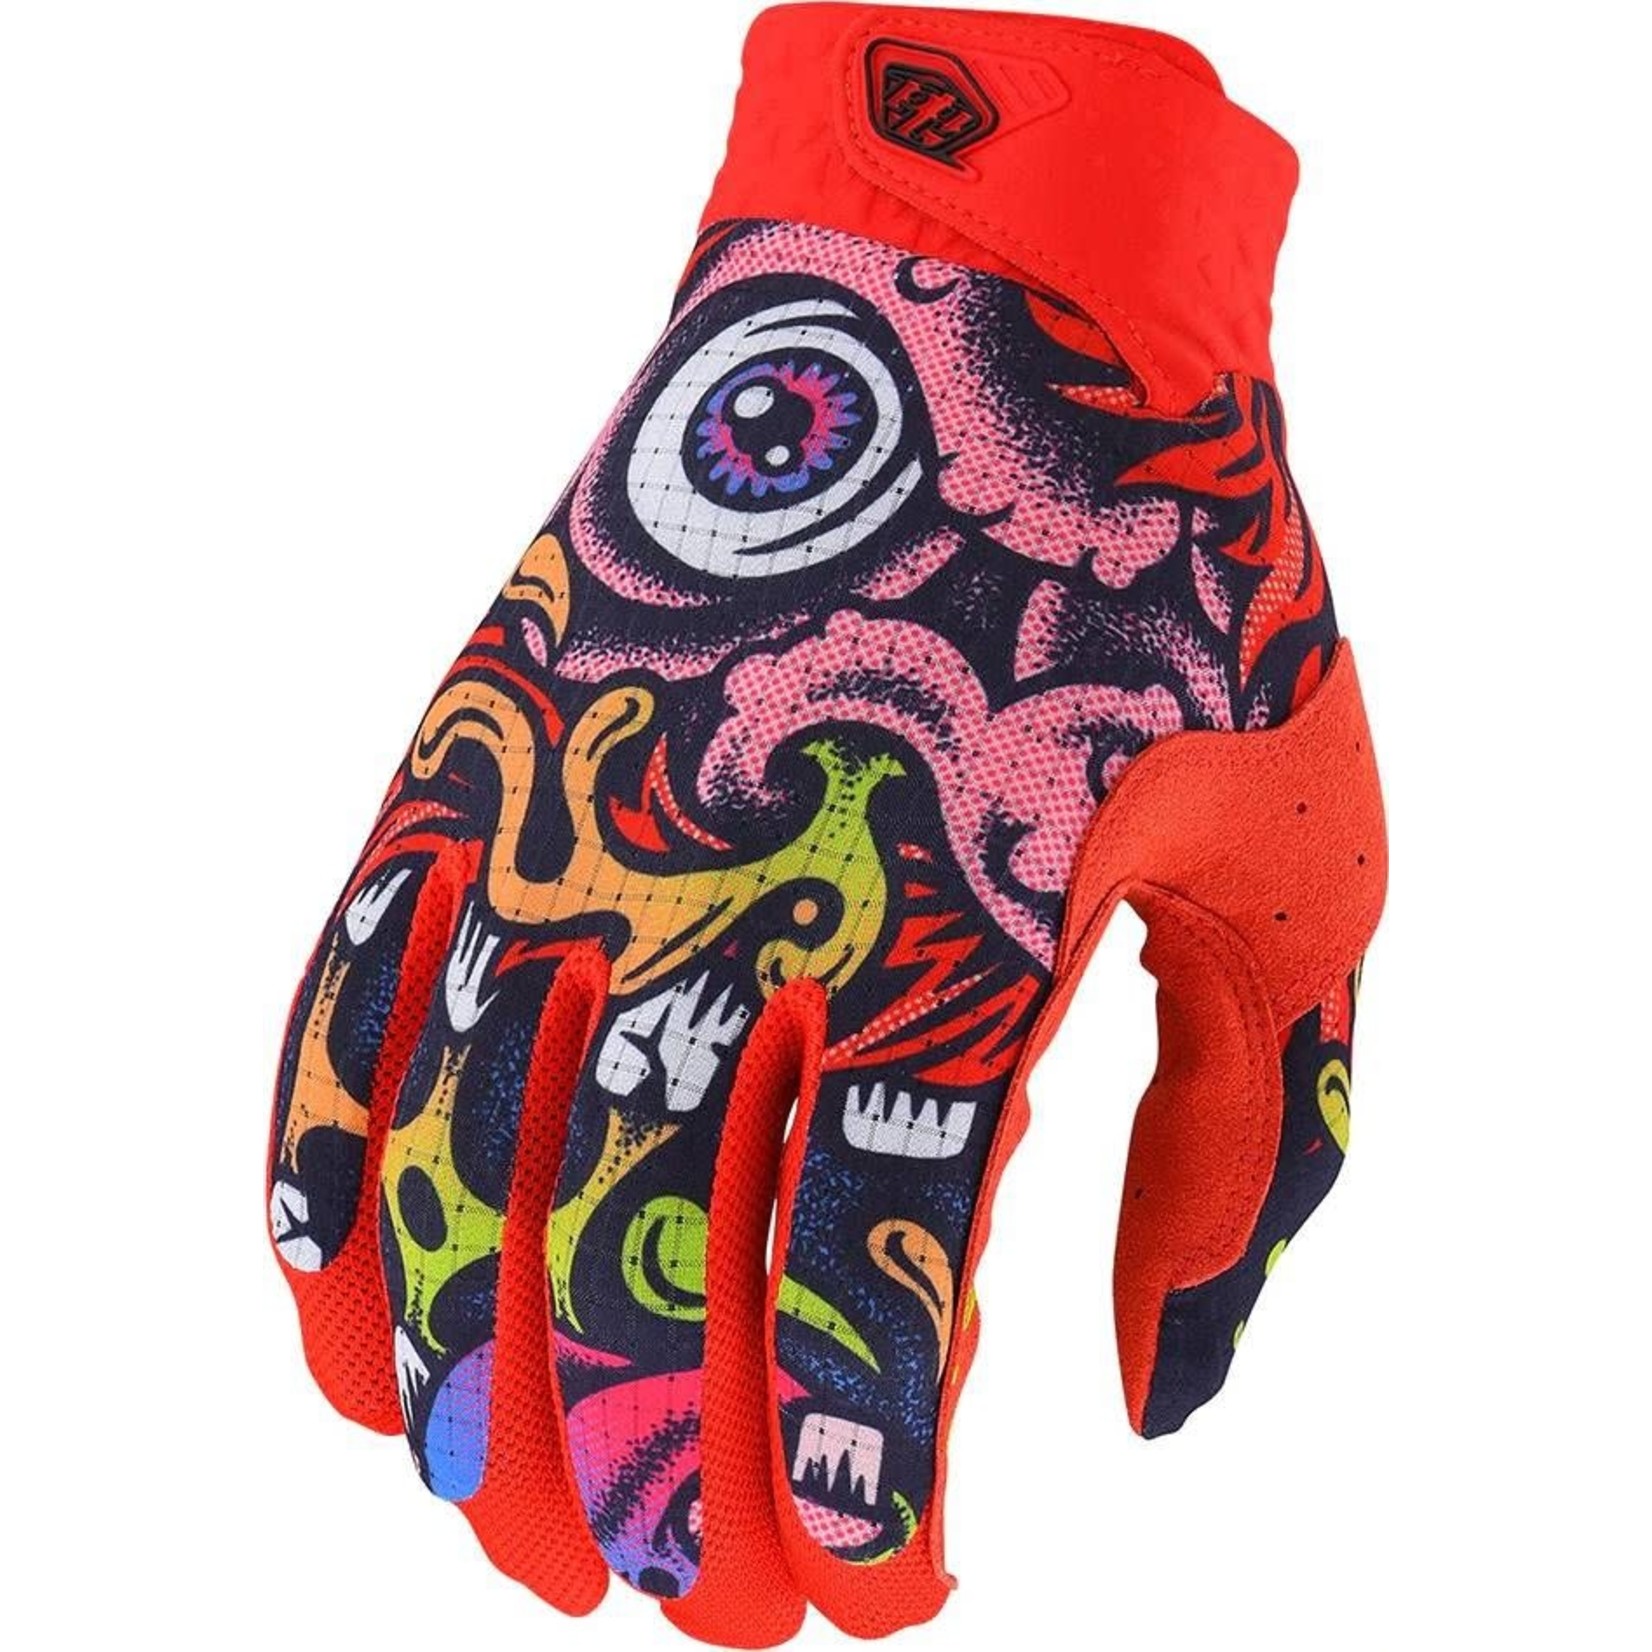 TROY LEE DESIGNS TLD YOUTH AIR GLOVE MED BIGFOOT RED 406556013